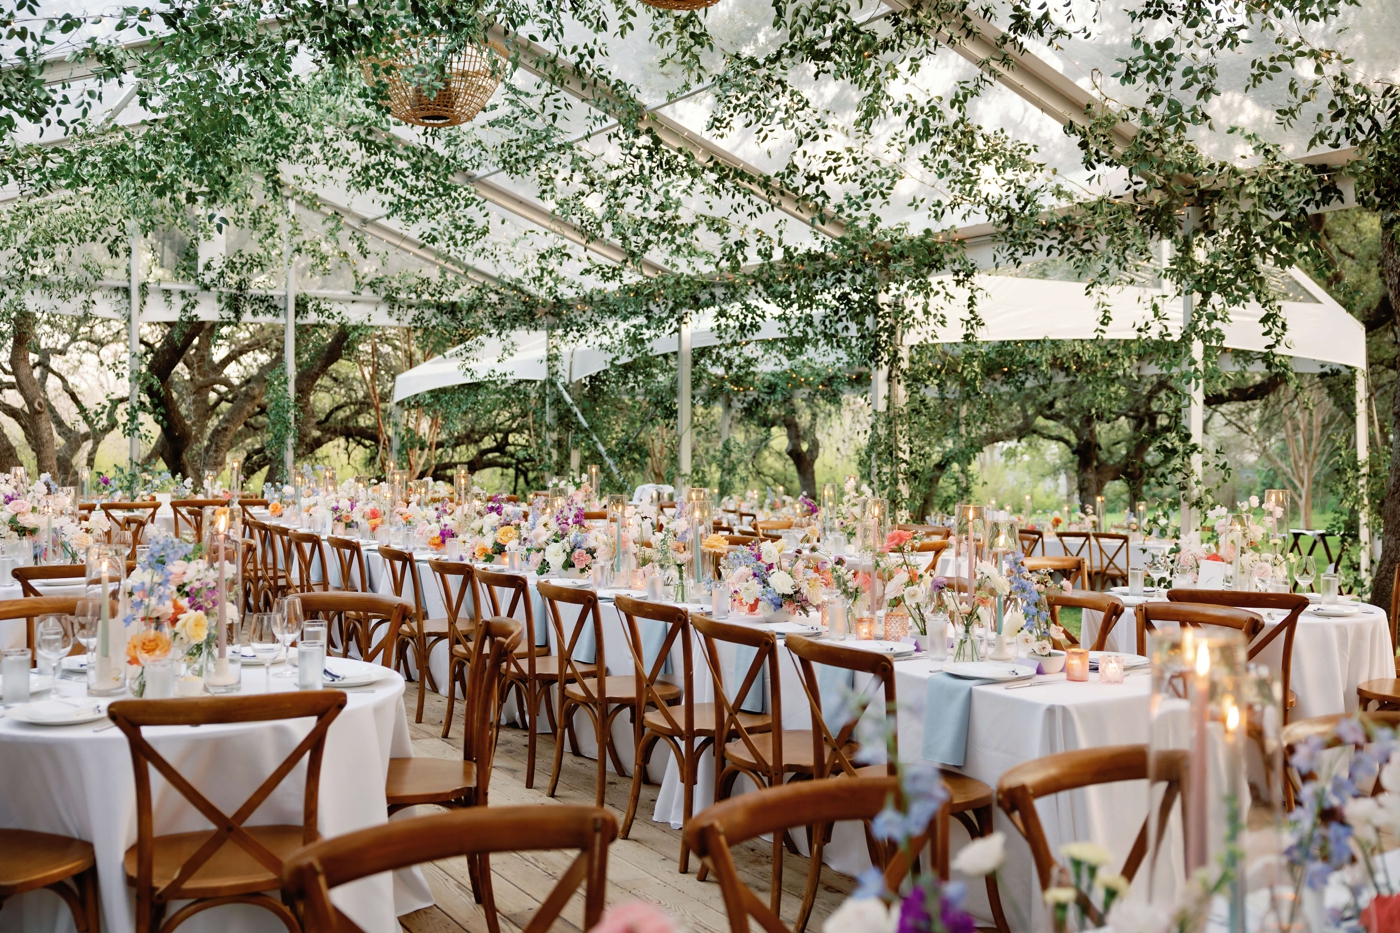 Ivy covered tent for an outdoor wedding in Austin at Mattie's